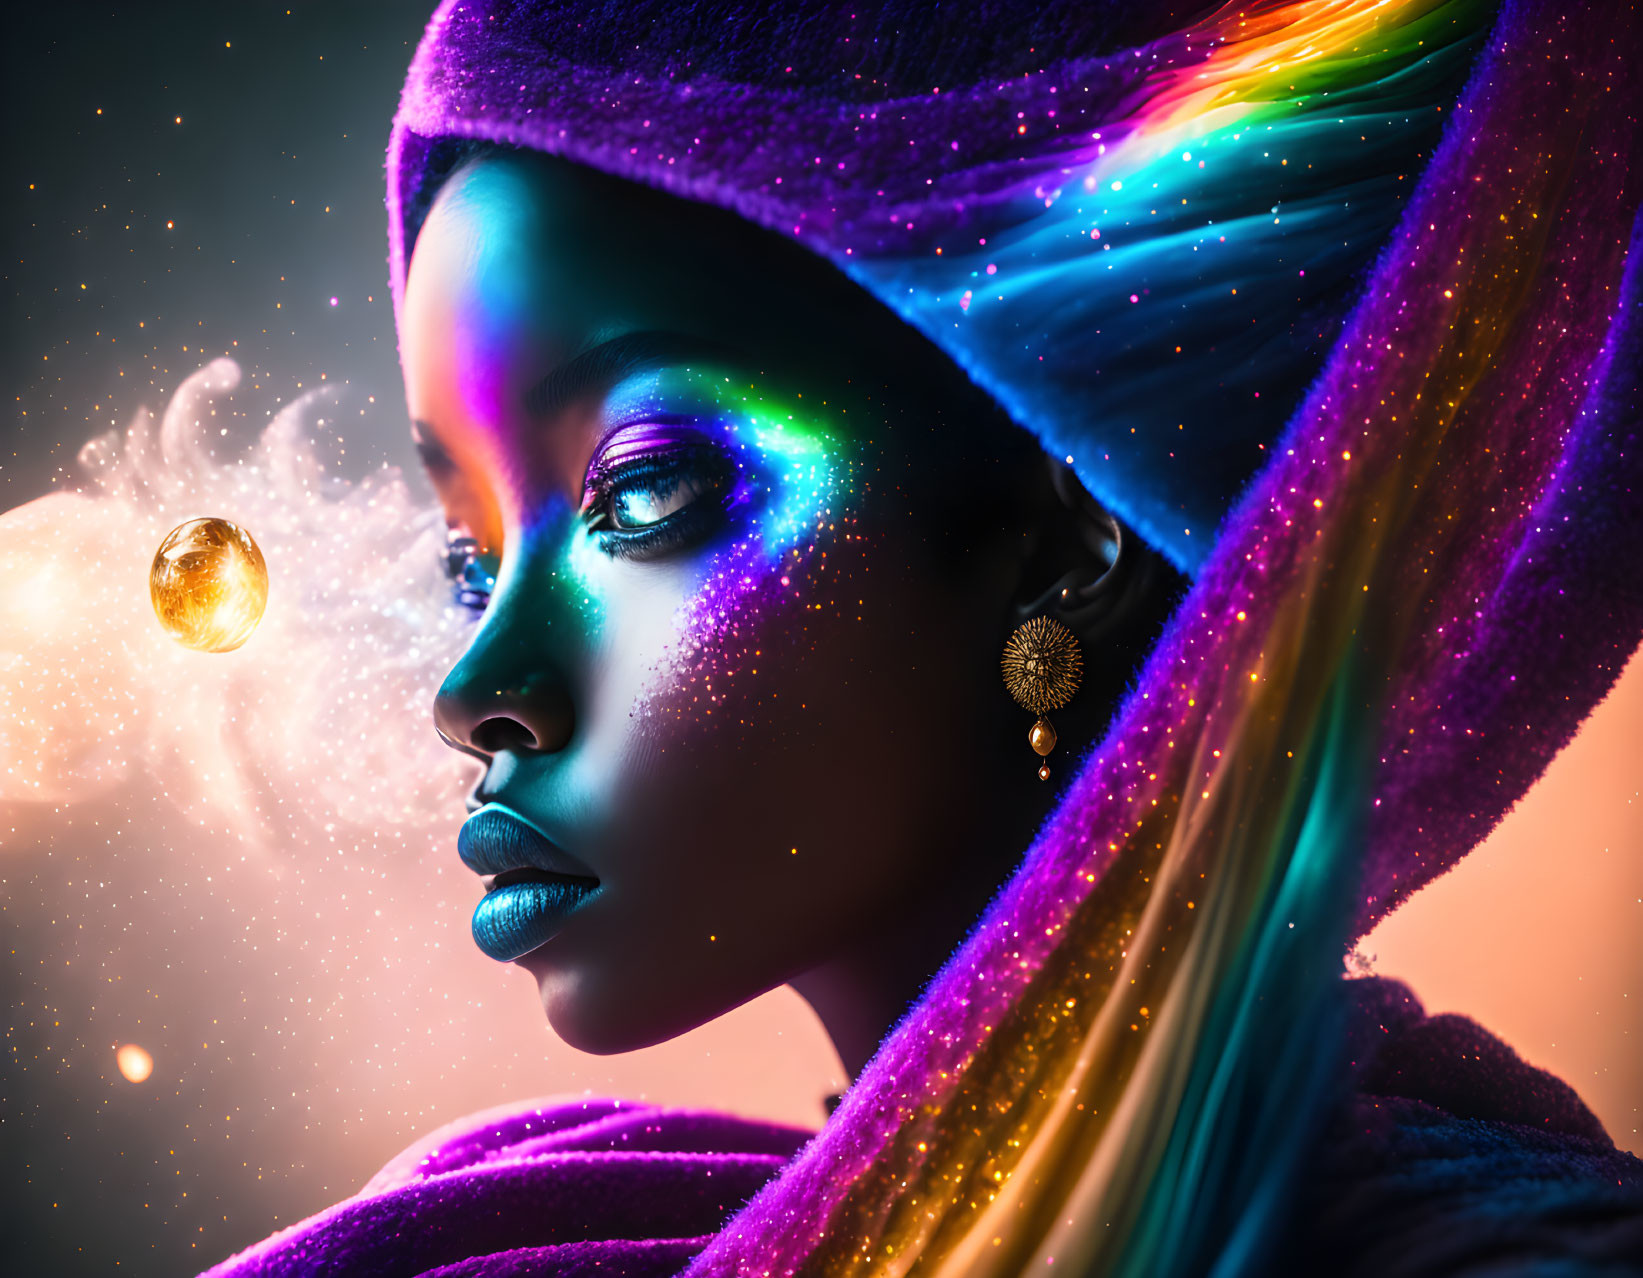 Colorful cosmic makeup portrait of a woman with starry headwrap in space-themed setting